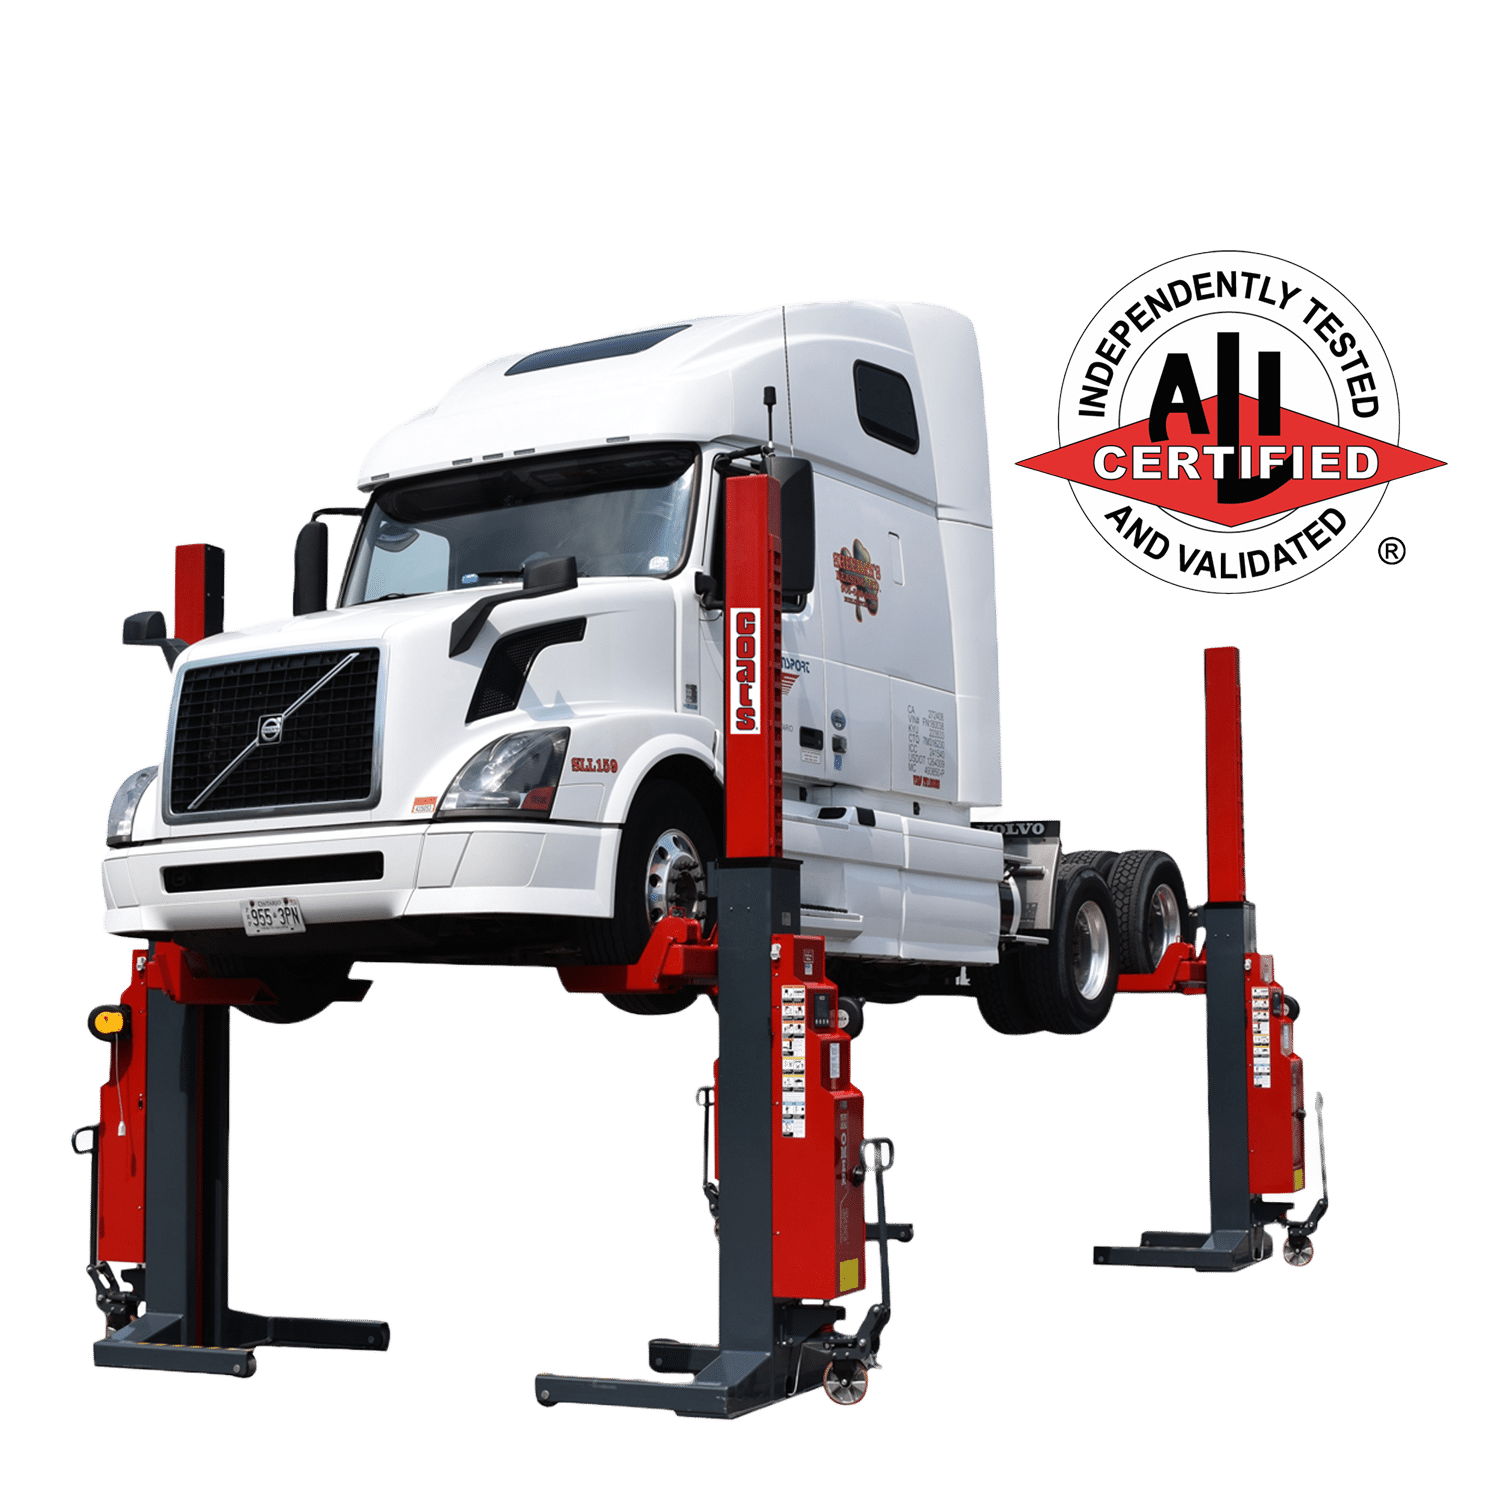 Logo that says “Independently Tested and Validated” in an outer white circle, and a centered red diamond in the circle says “ALI Certified” is placed next to a mobile column lift with a semi truck on top